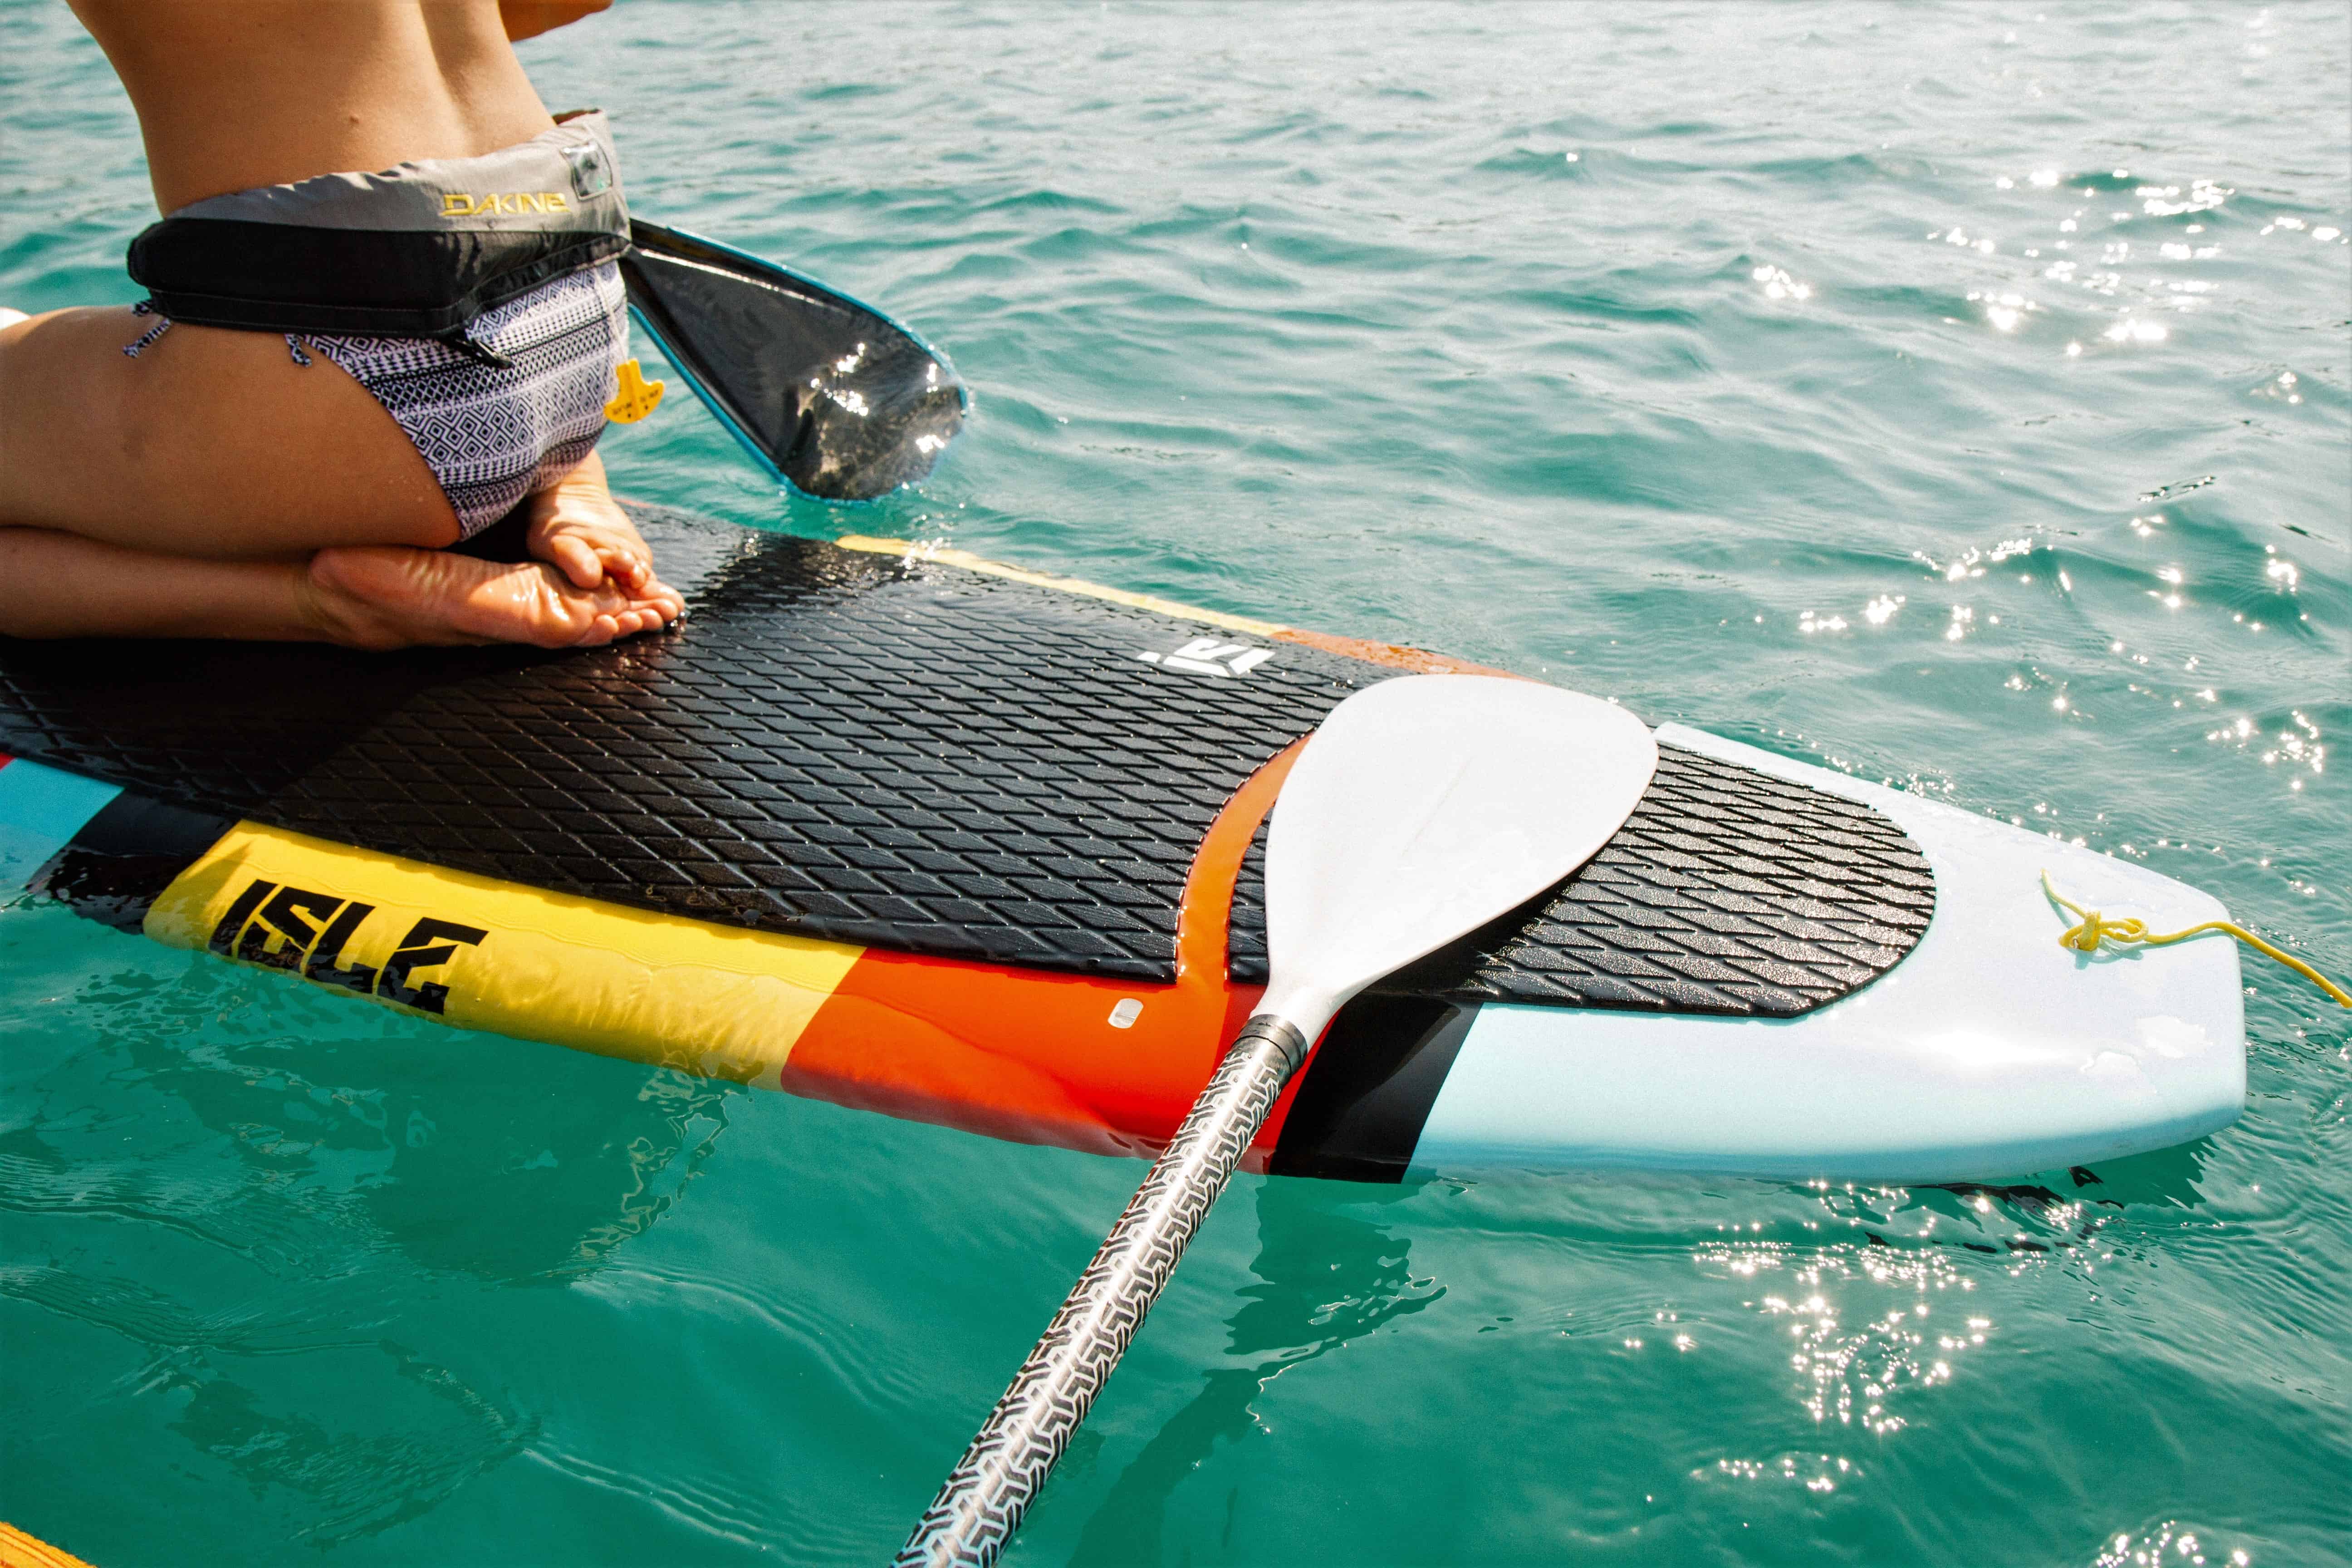 basic paddle board equipment to get started